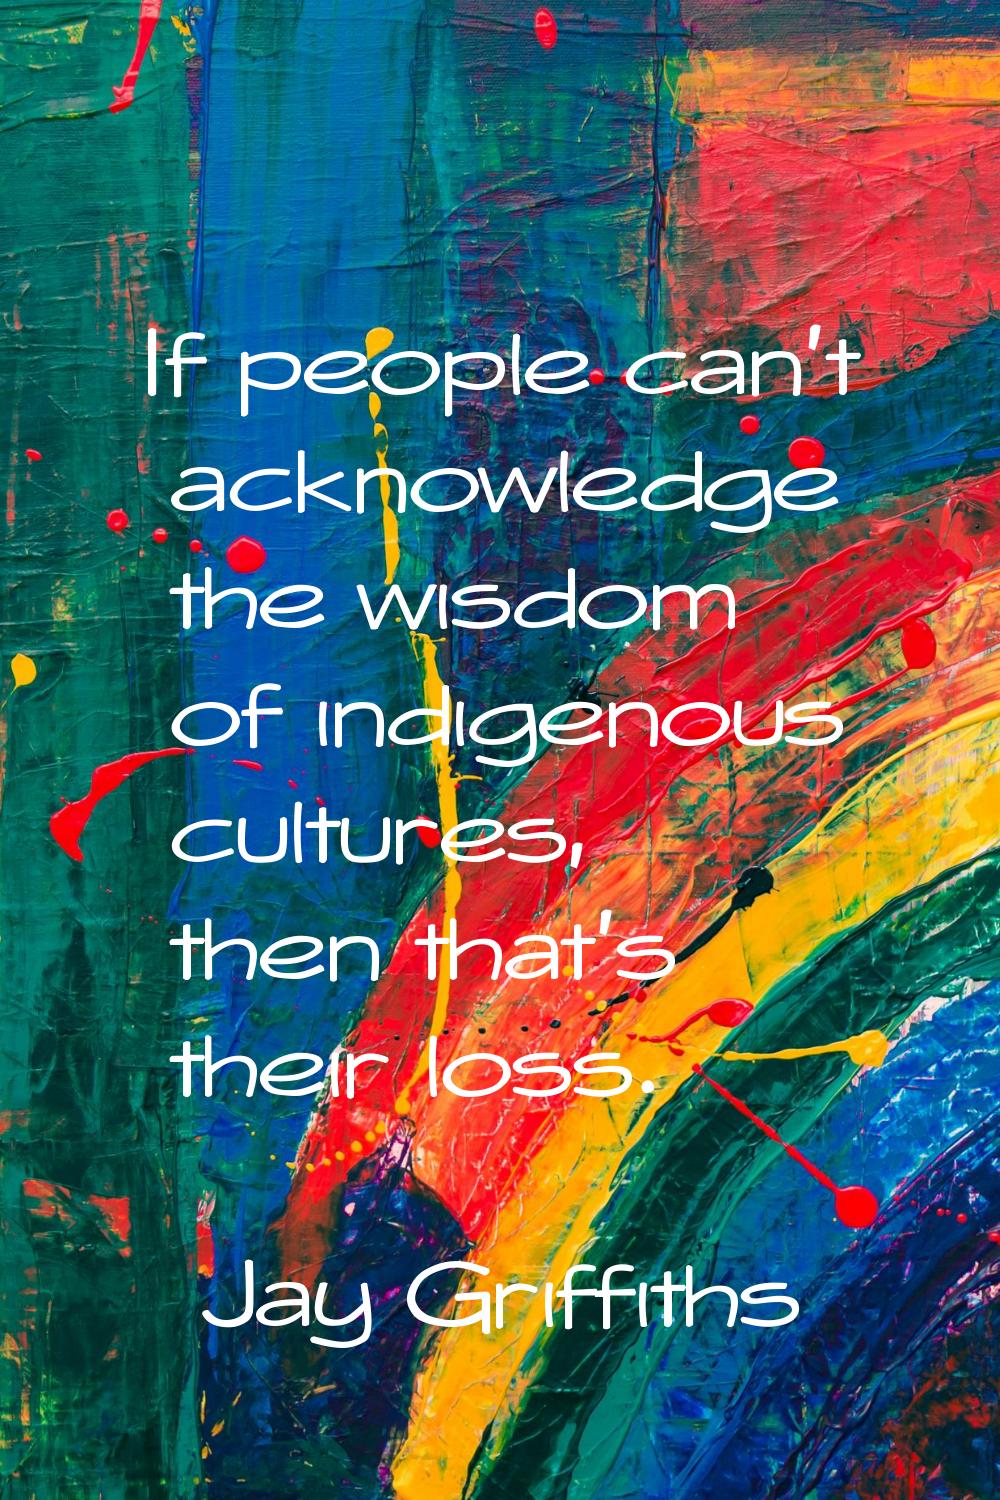 If people can't acknowledge the wisdom of indigenous cultures, then that's their loss.